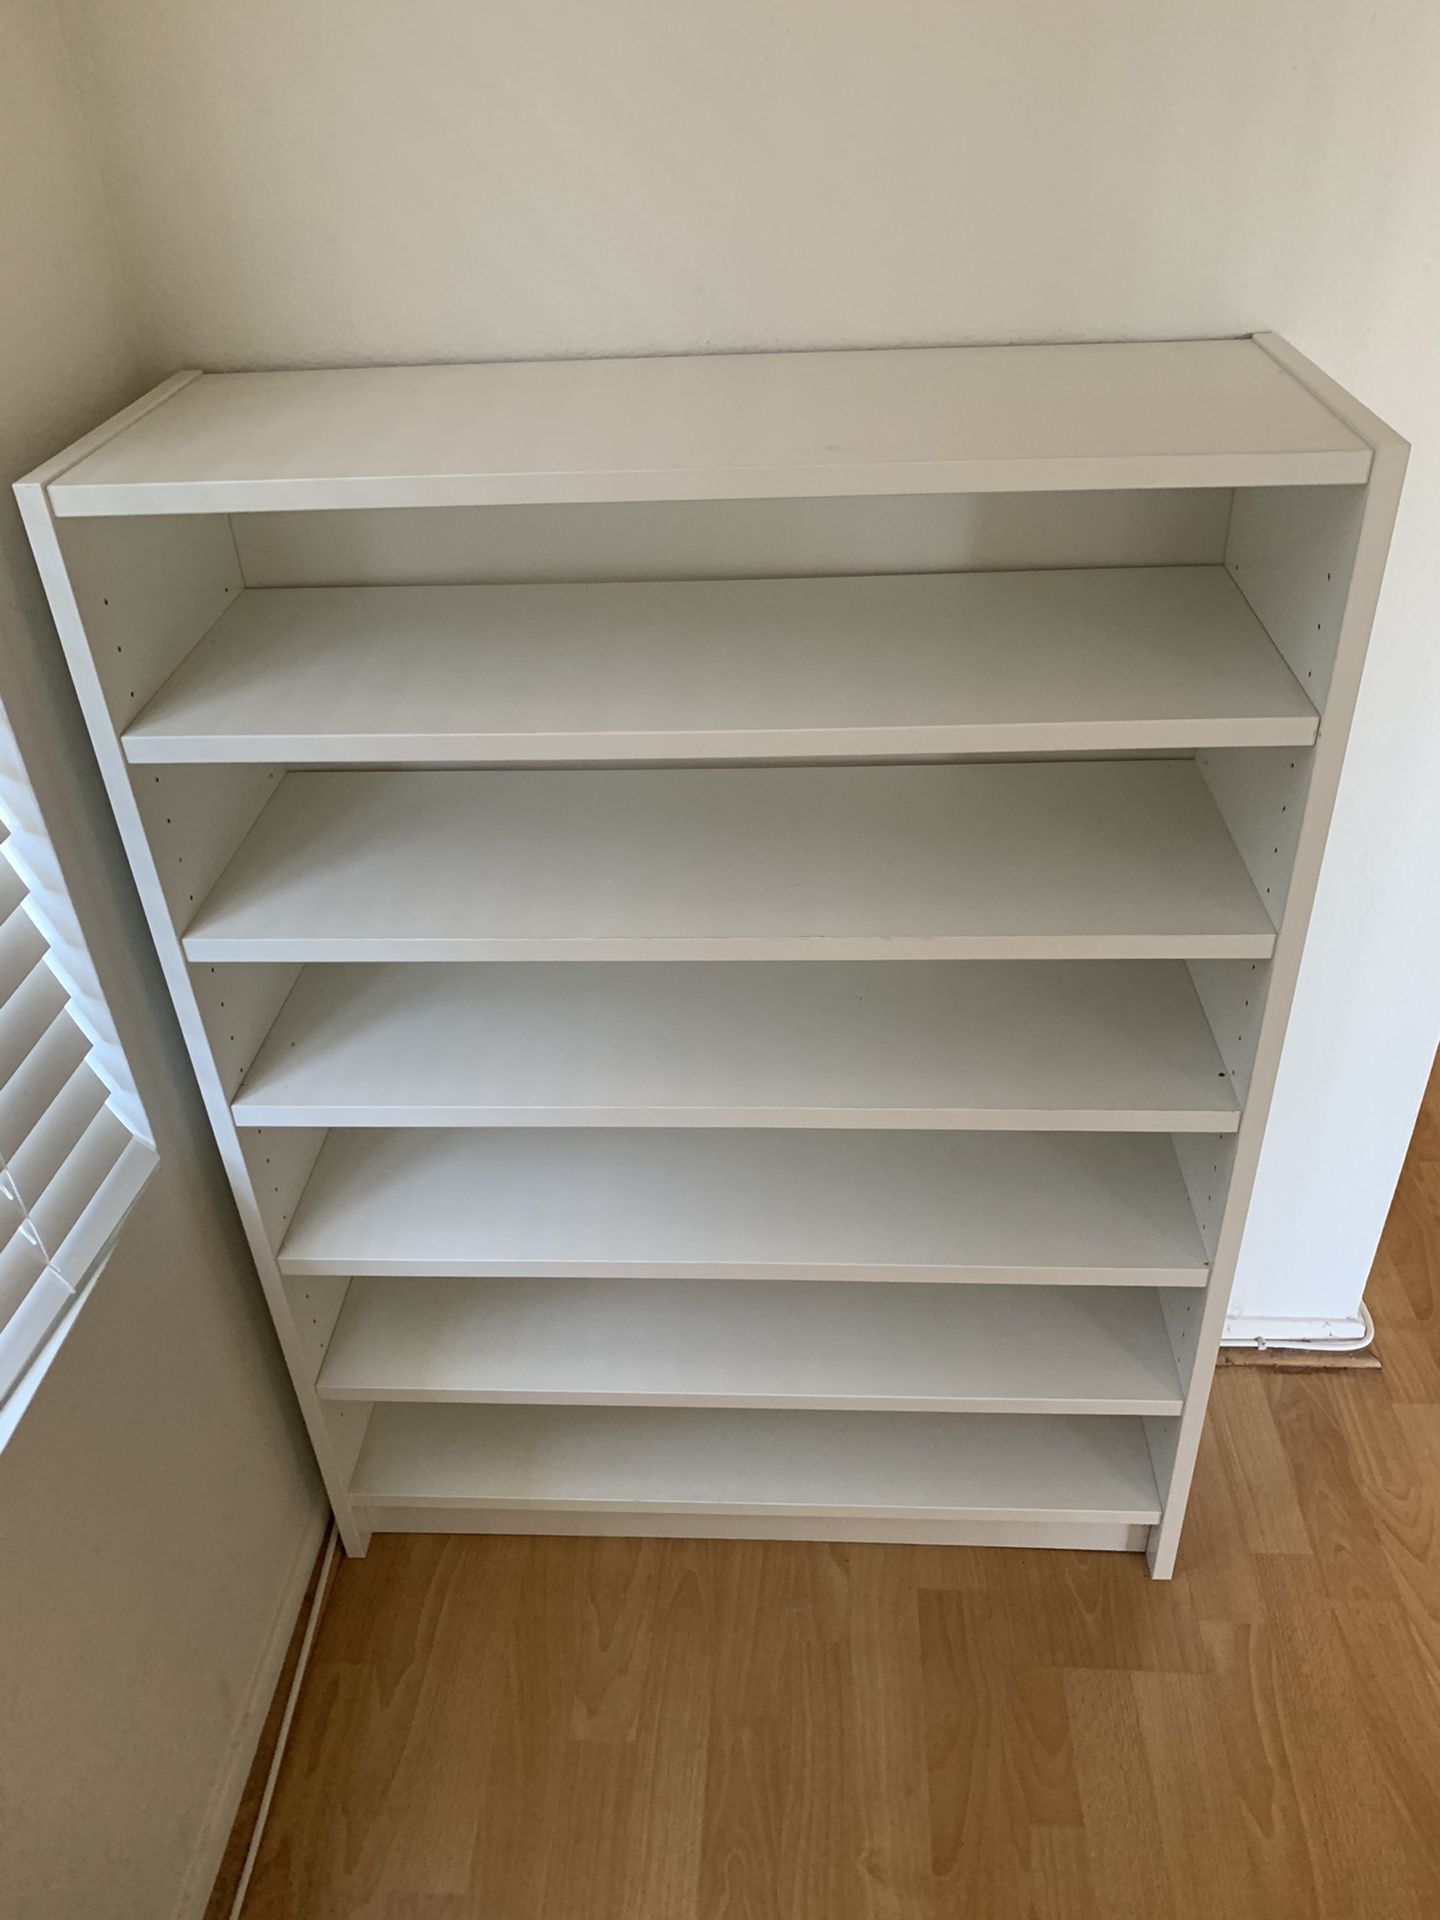 IKEA shelf with 3 extra shelves white can use for shoe rack excellent condition